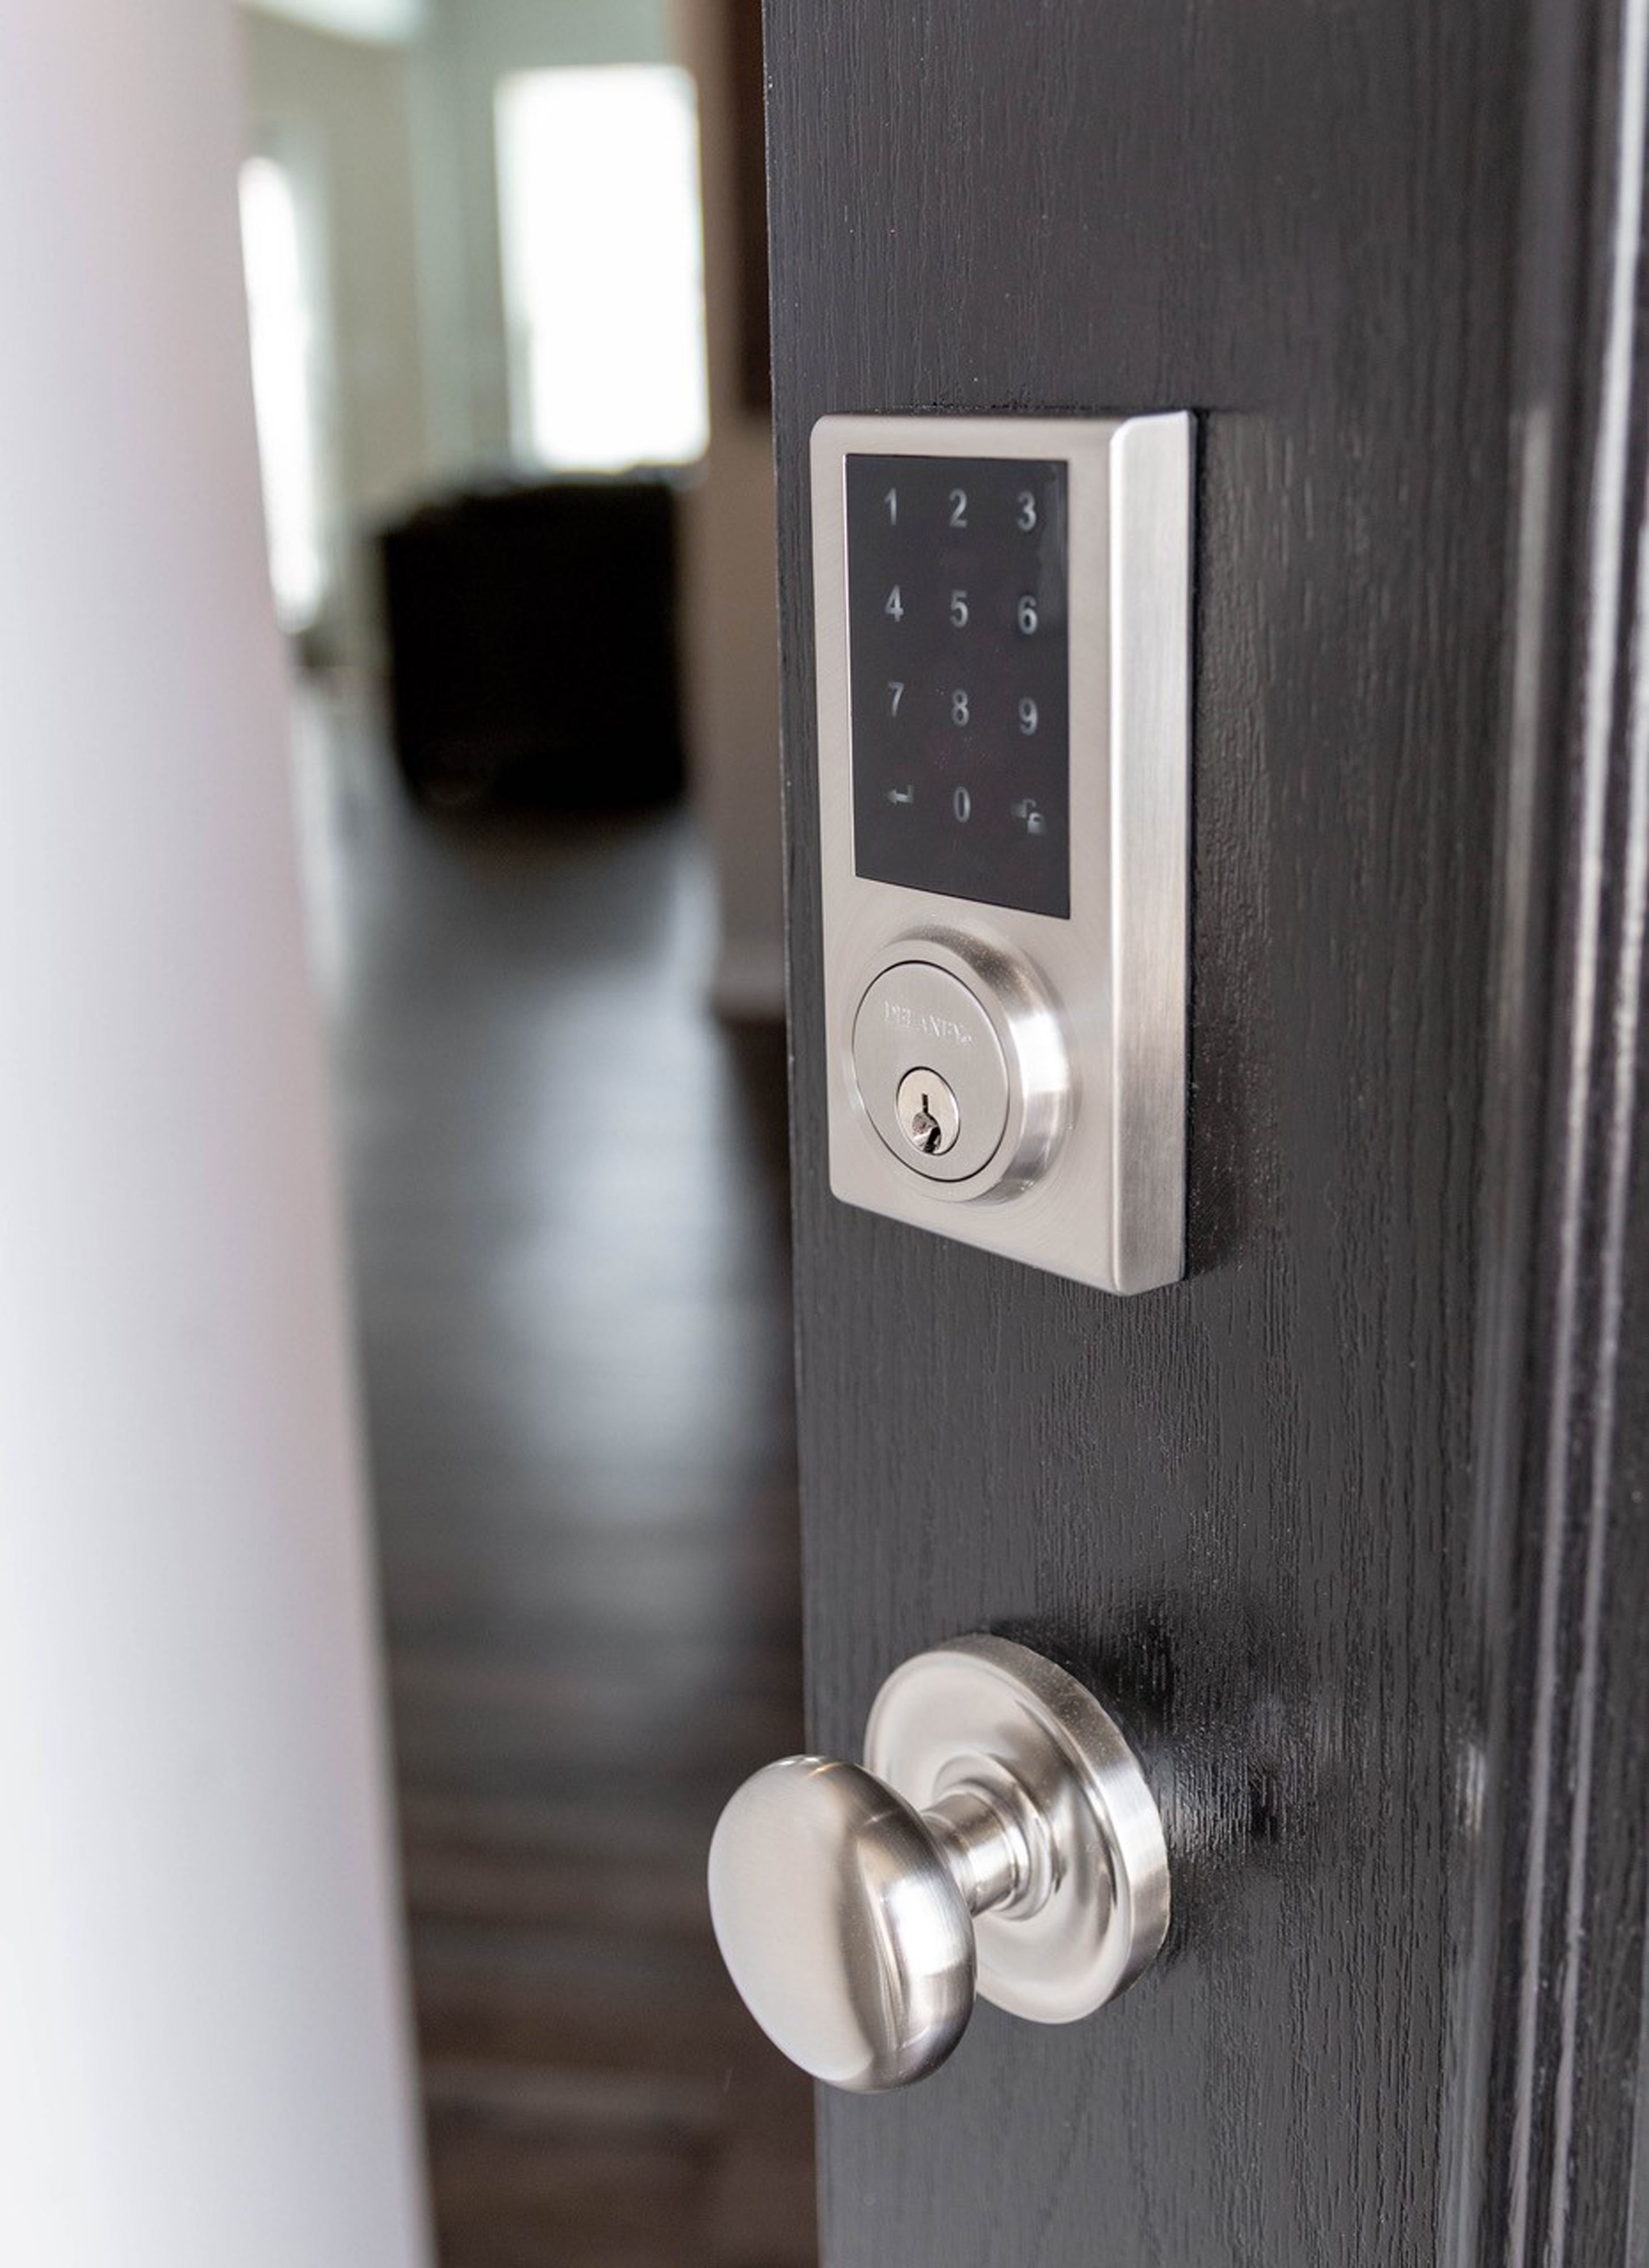 The innovative Z-Wave (ZW300) Touchscreen Smartlock is a high-security lock solution that combines an elegant design with a bright back-lit LED touchscreen and a user-friendly app for up to 20 users.